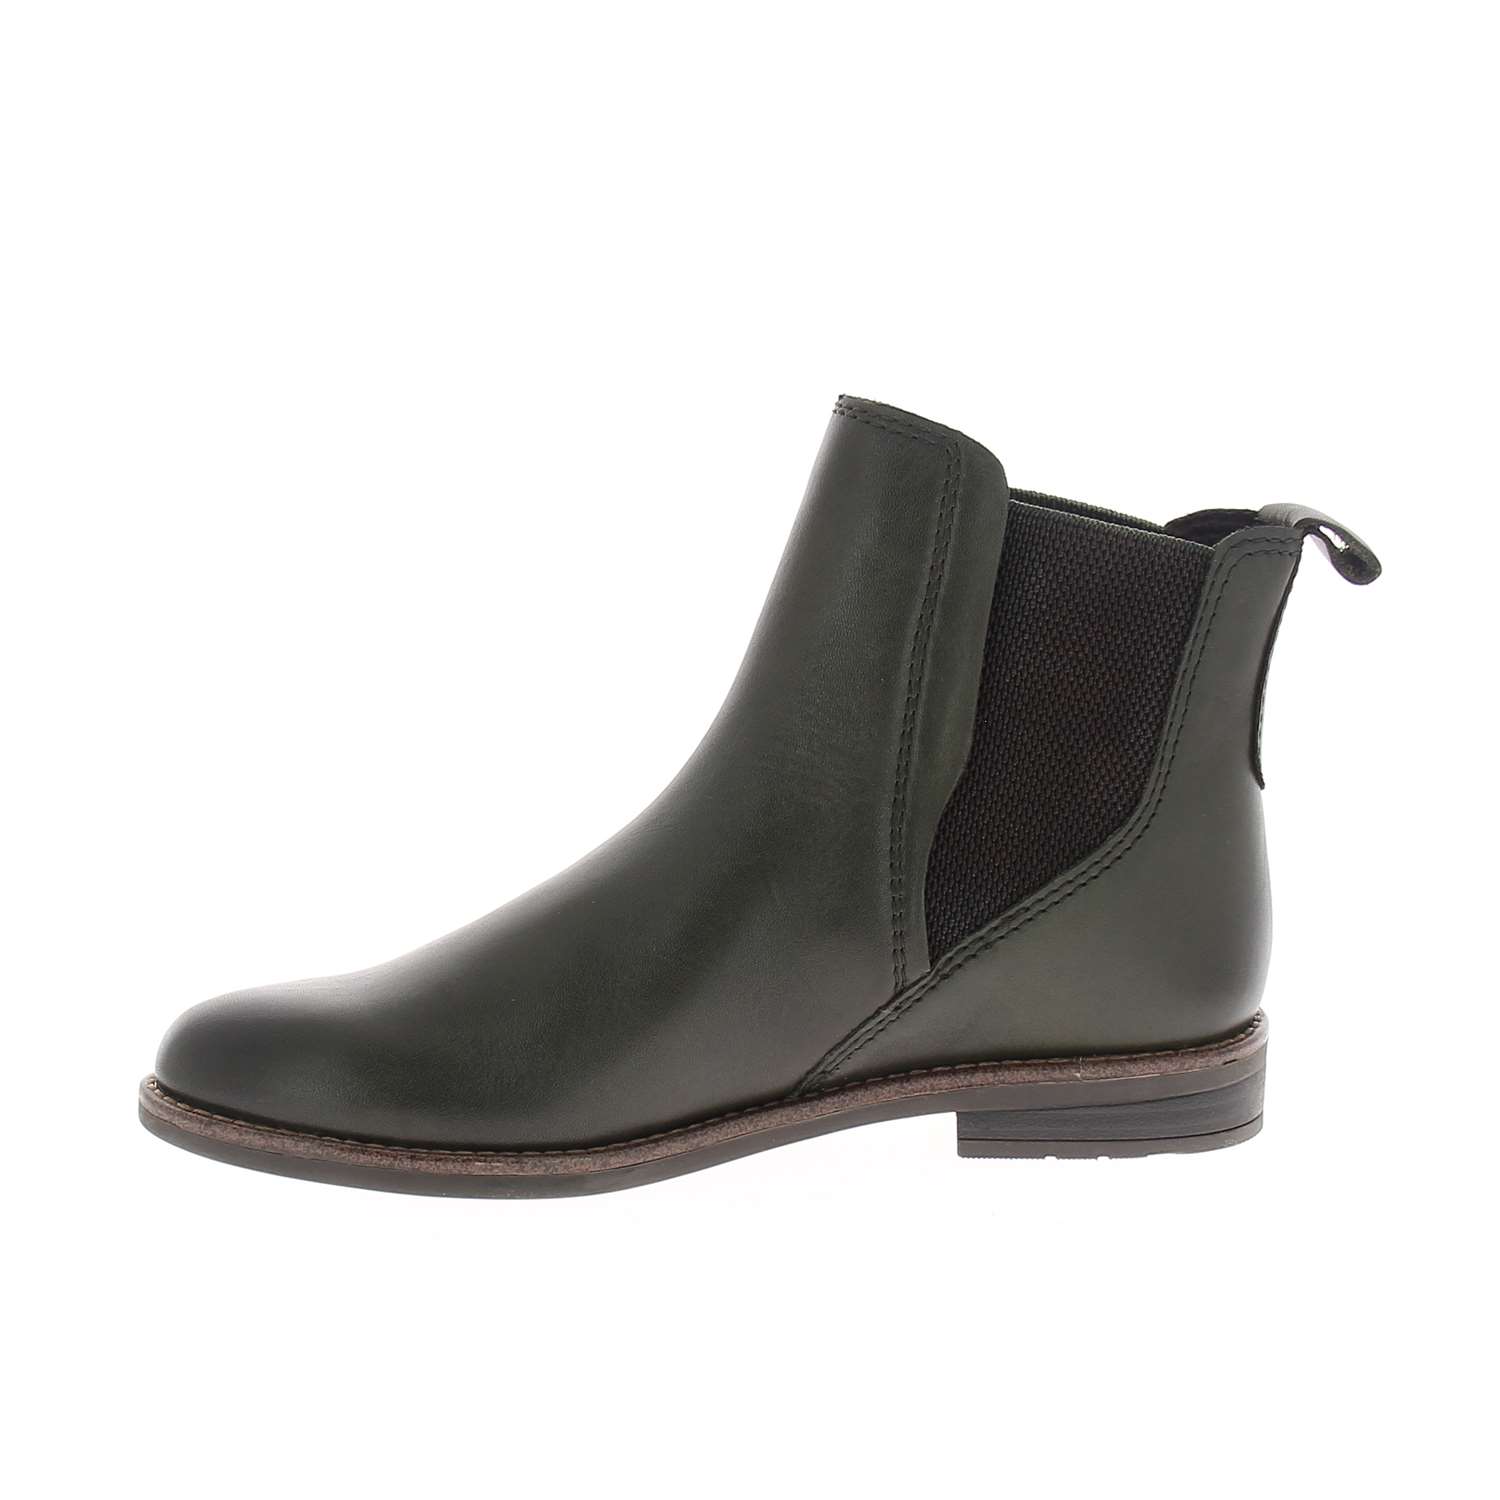 05 - MAGREEN - MARCO TOZZI - Boots et bottines - Cuir